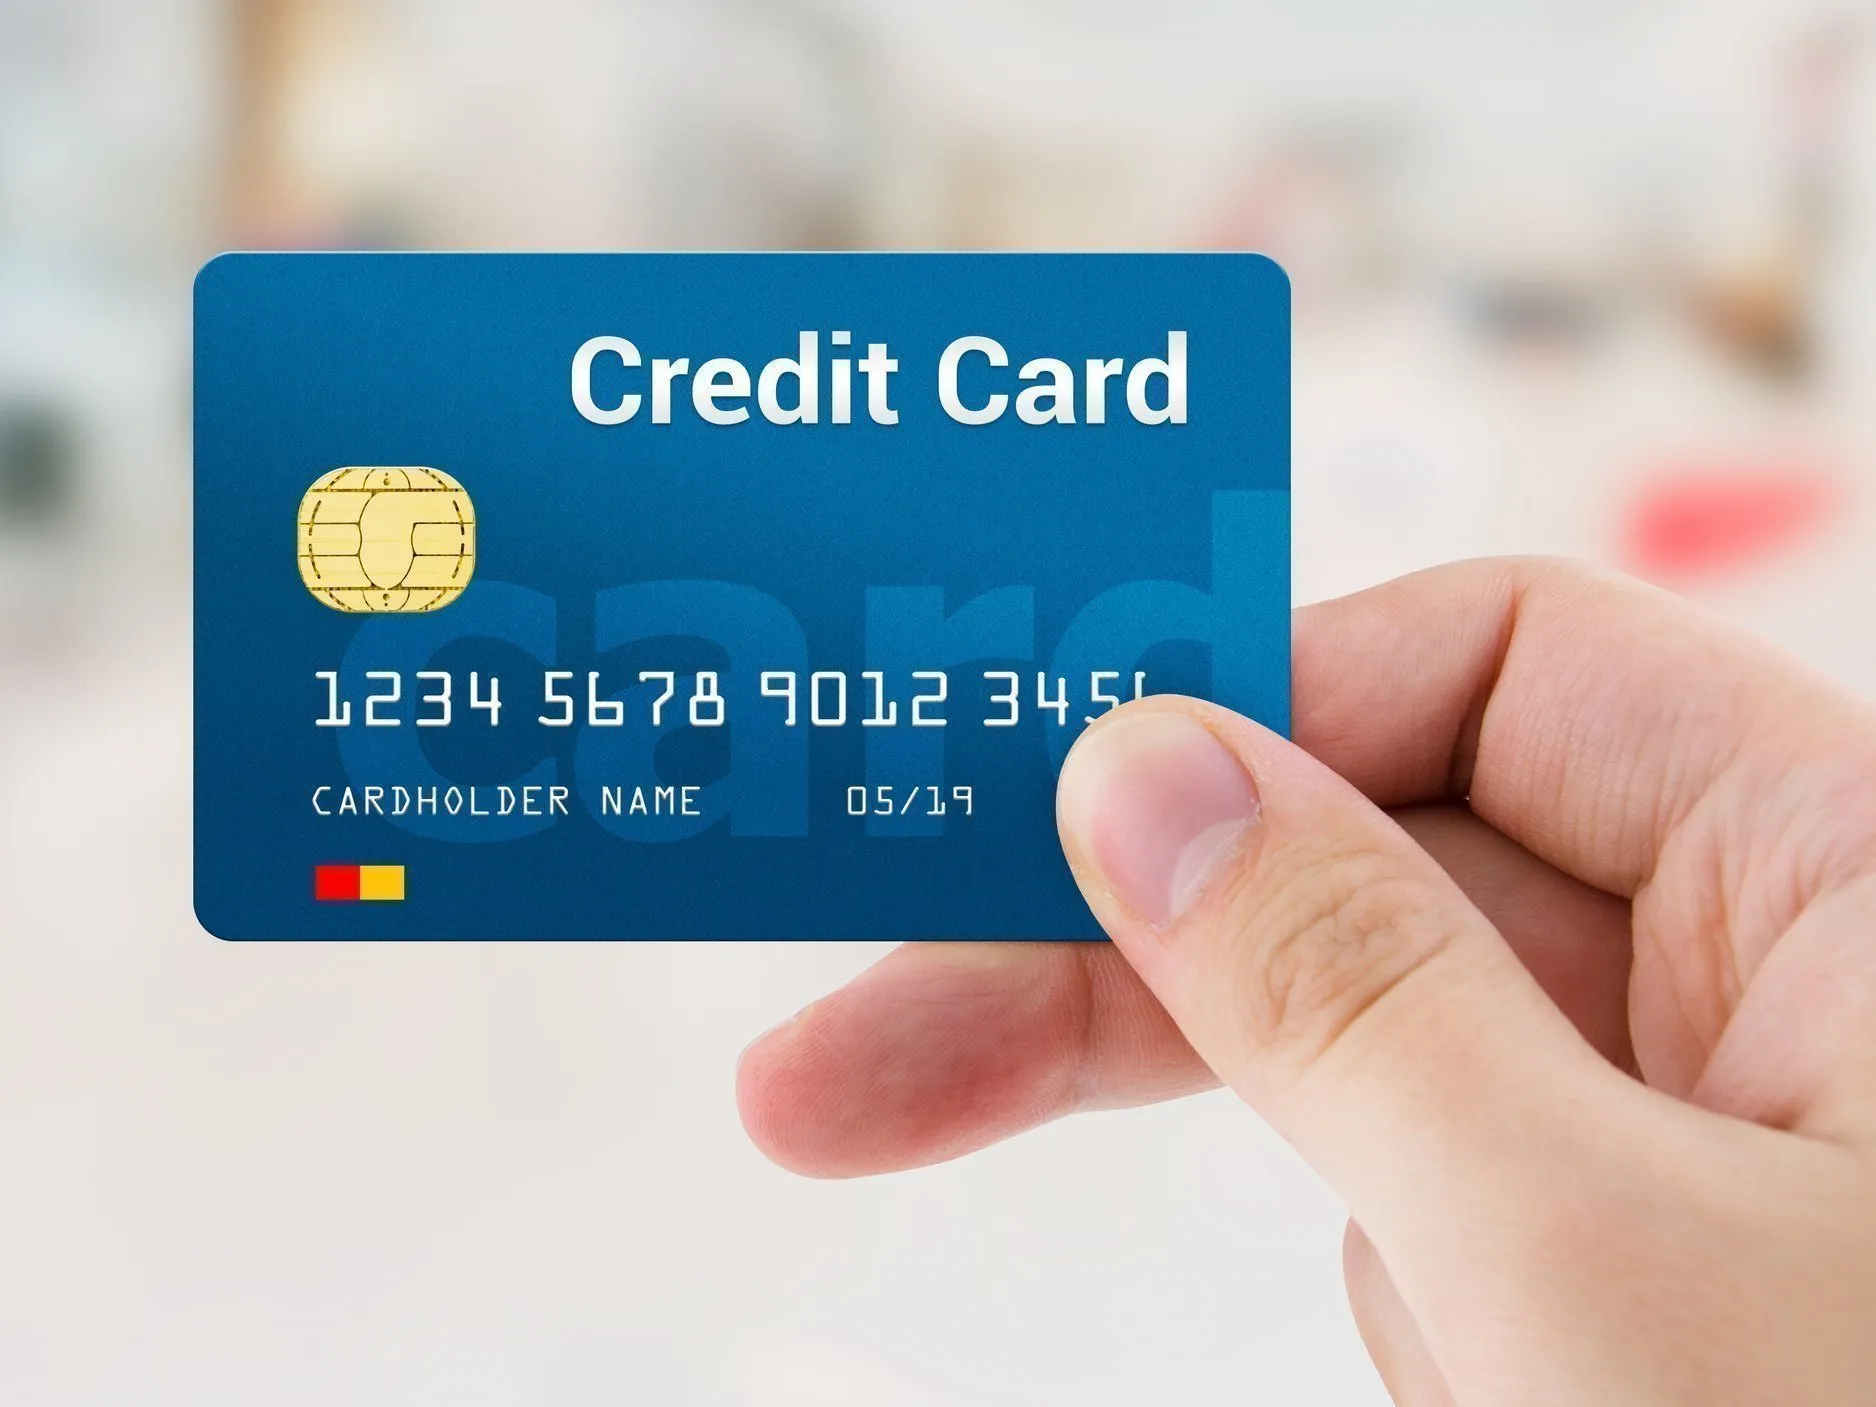 Does Using A Credit Card Make You Spend More Money?